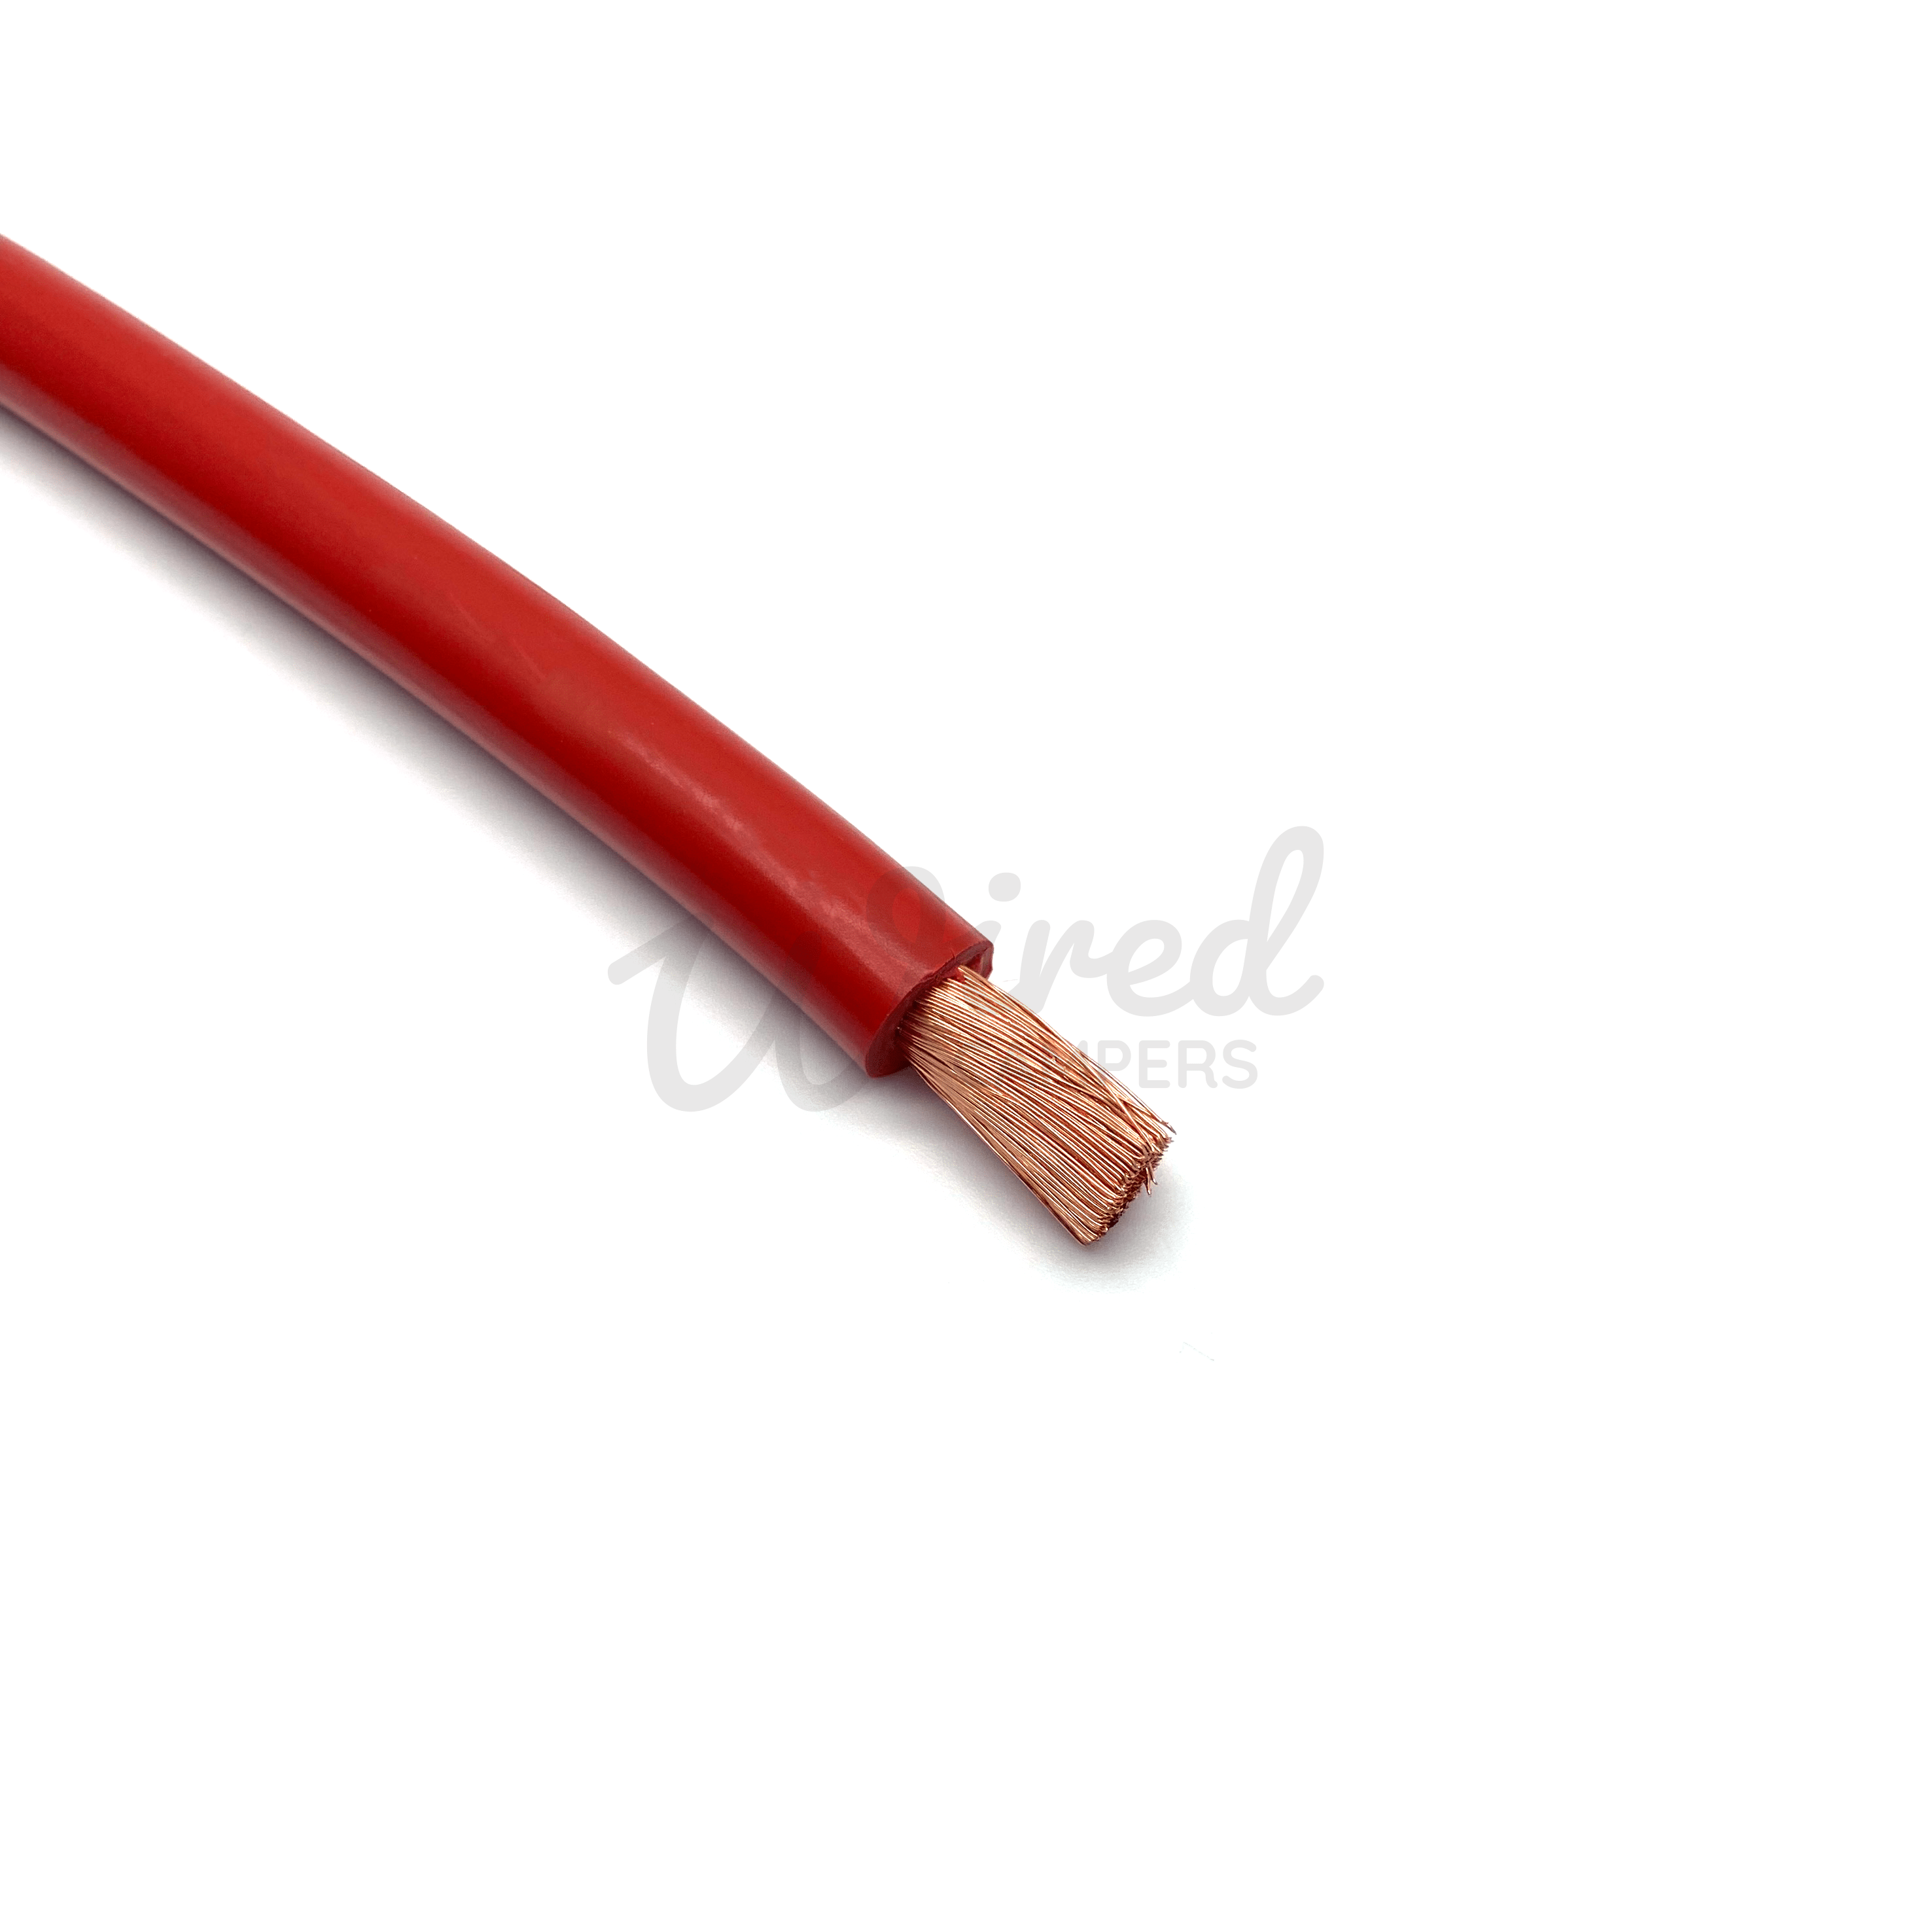 Wired Campers Limited 50M - 16mm² 110A Hi-Flex Battery/Welding/Inverter Flexible Cable - Red Positive